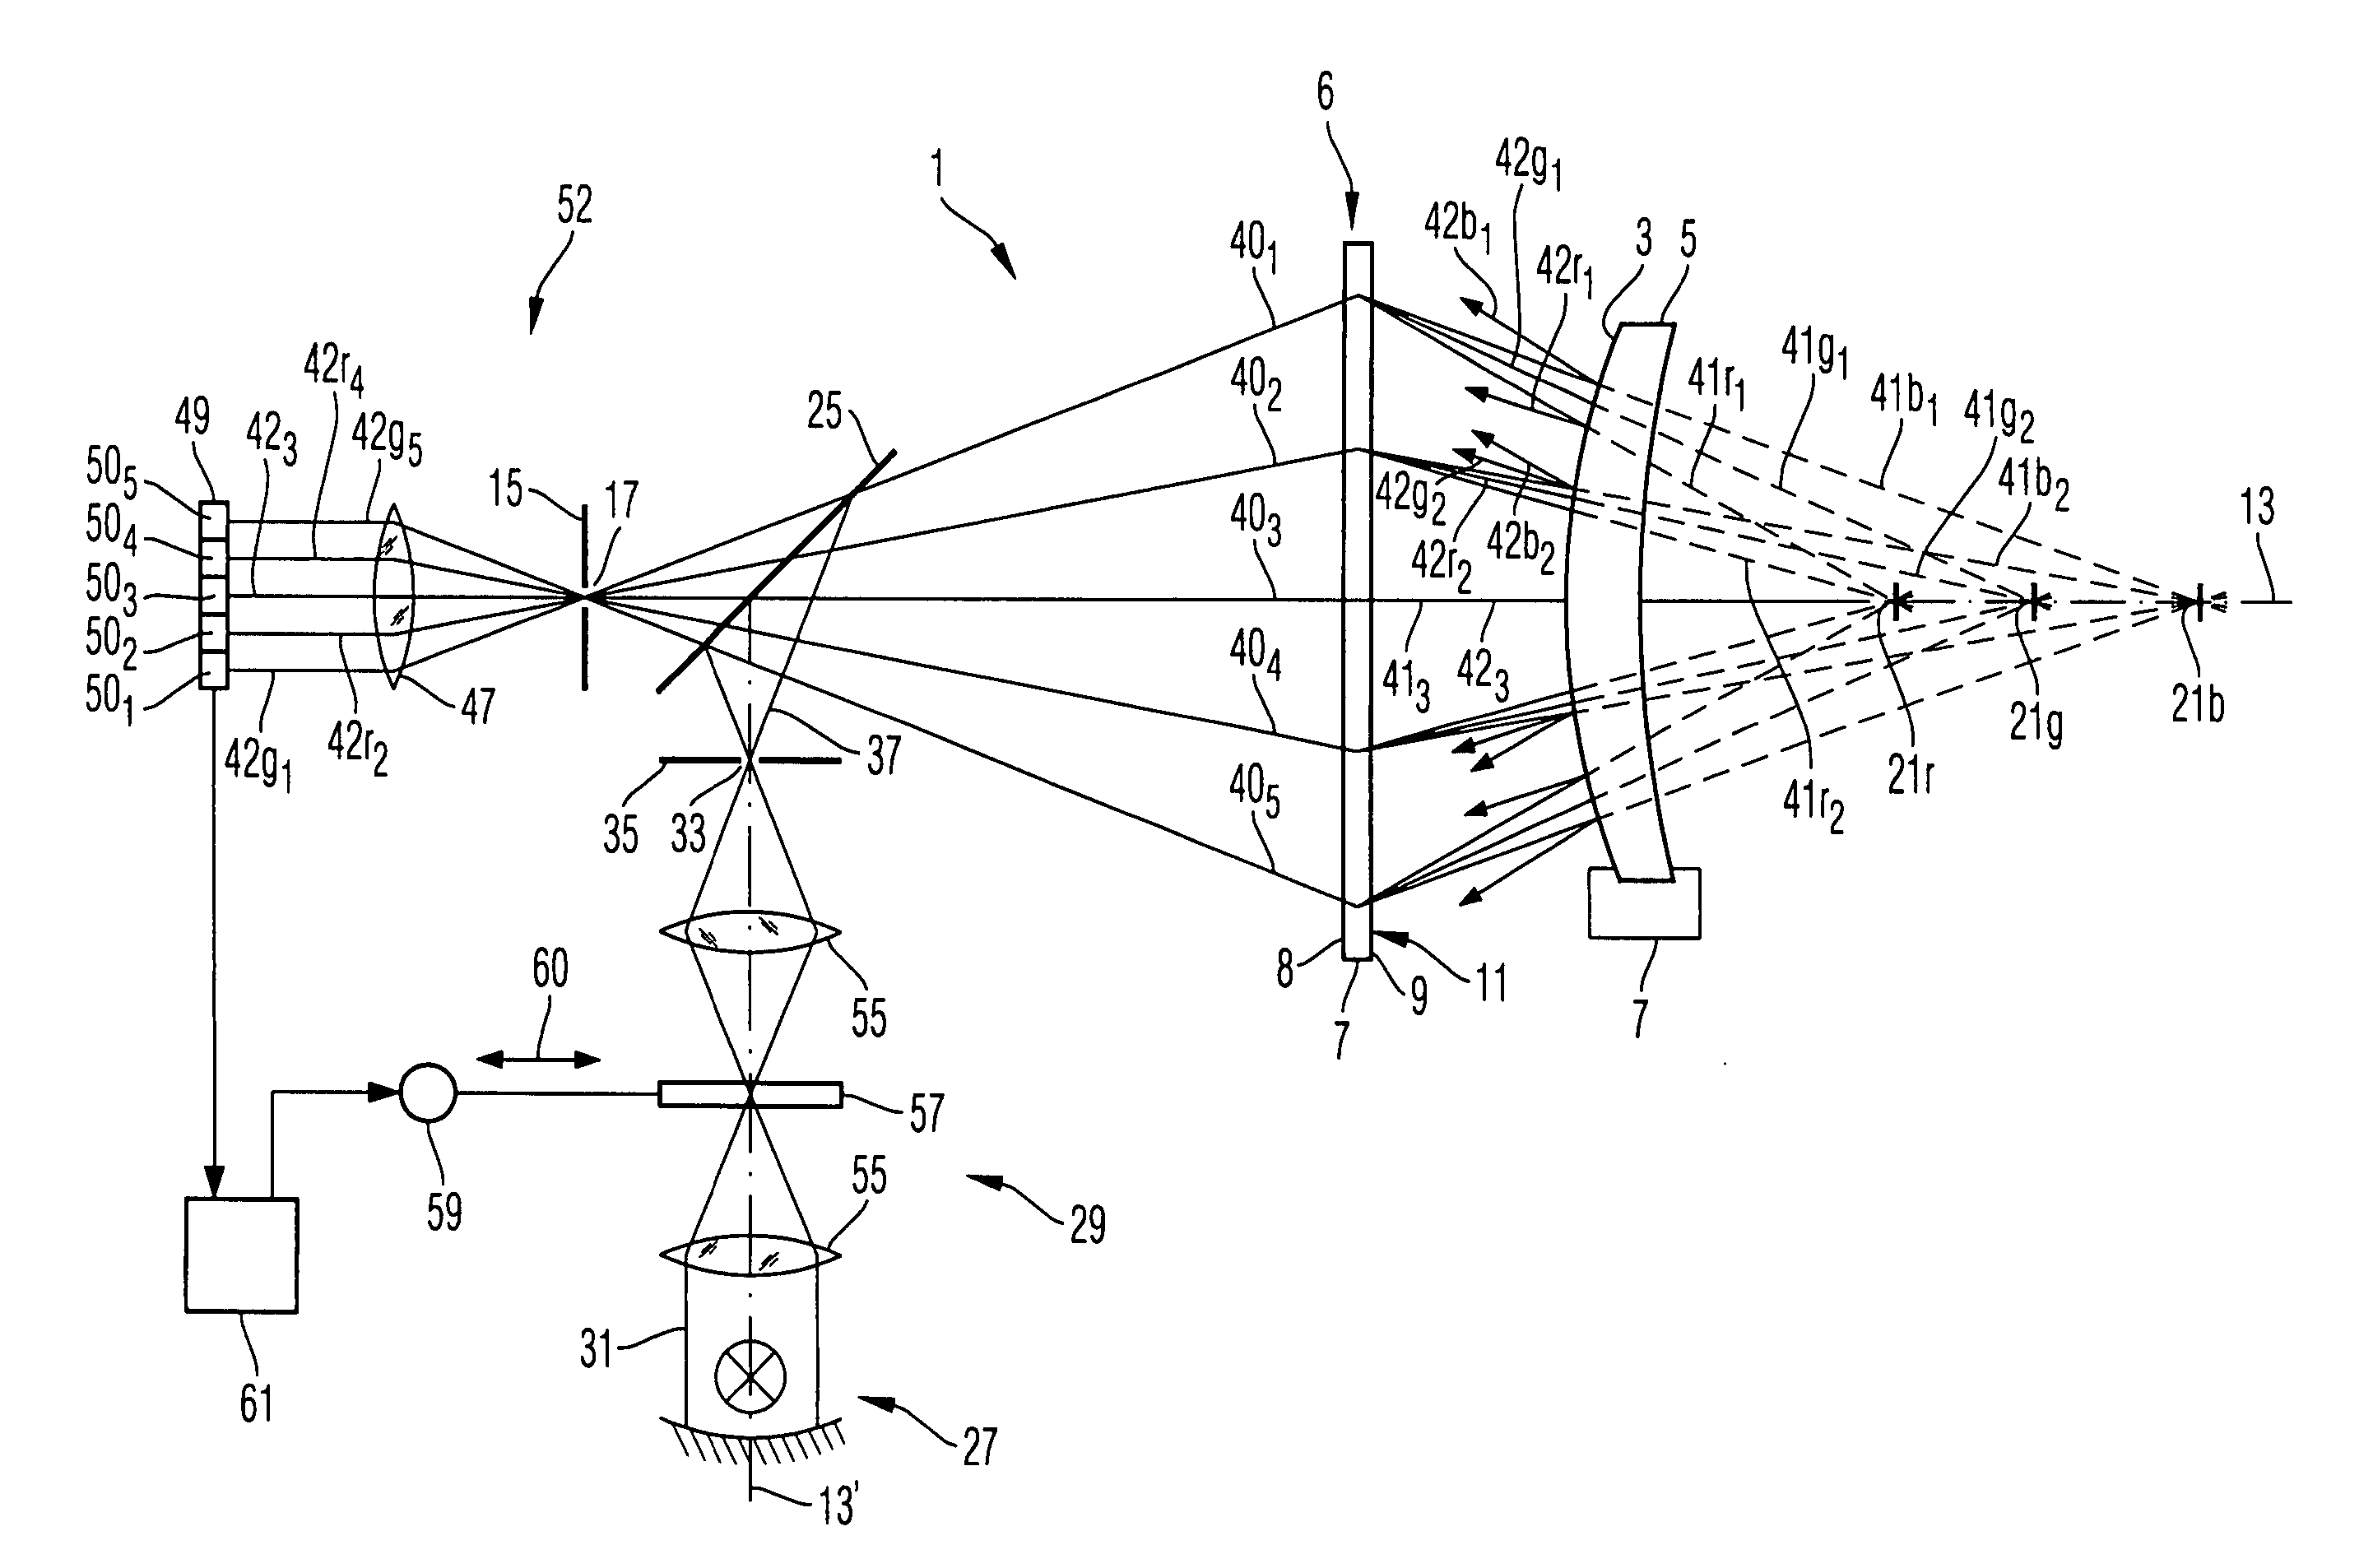 System and method for determining a shape of a surface of an object and method of manufacturing an object having a surface of a predetermined shape